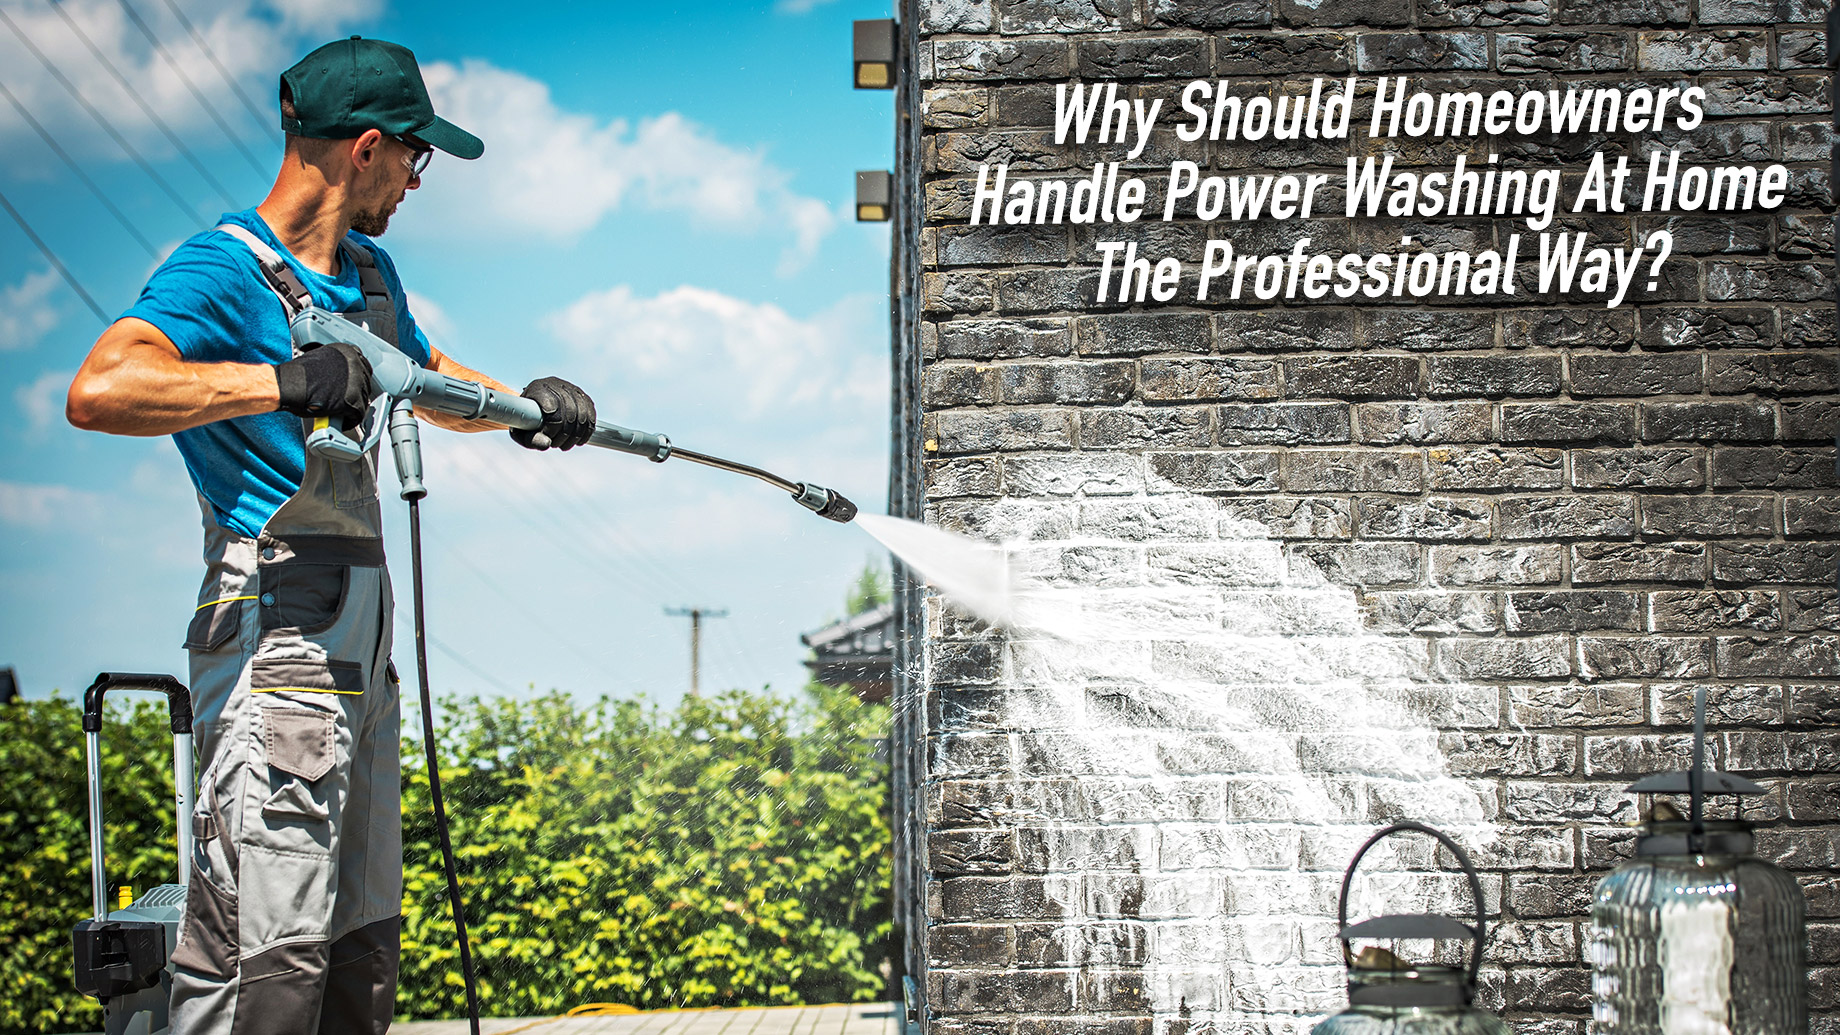 Why Should Homeowners Handle Power Washing At Home The Professional Way?